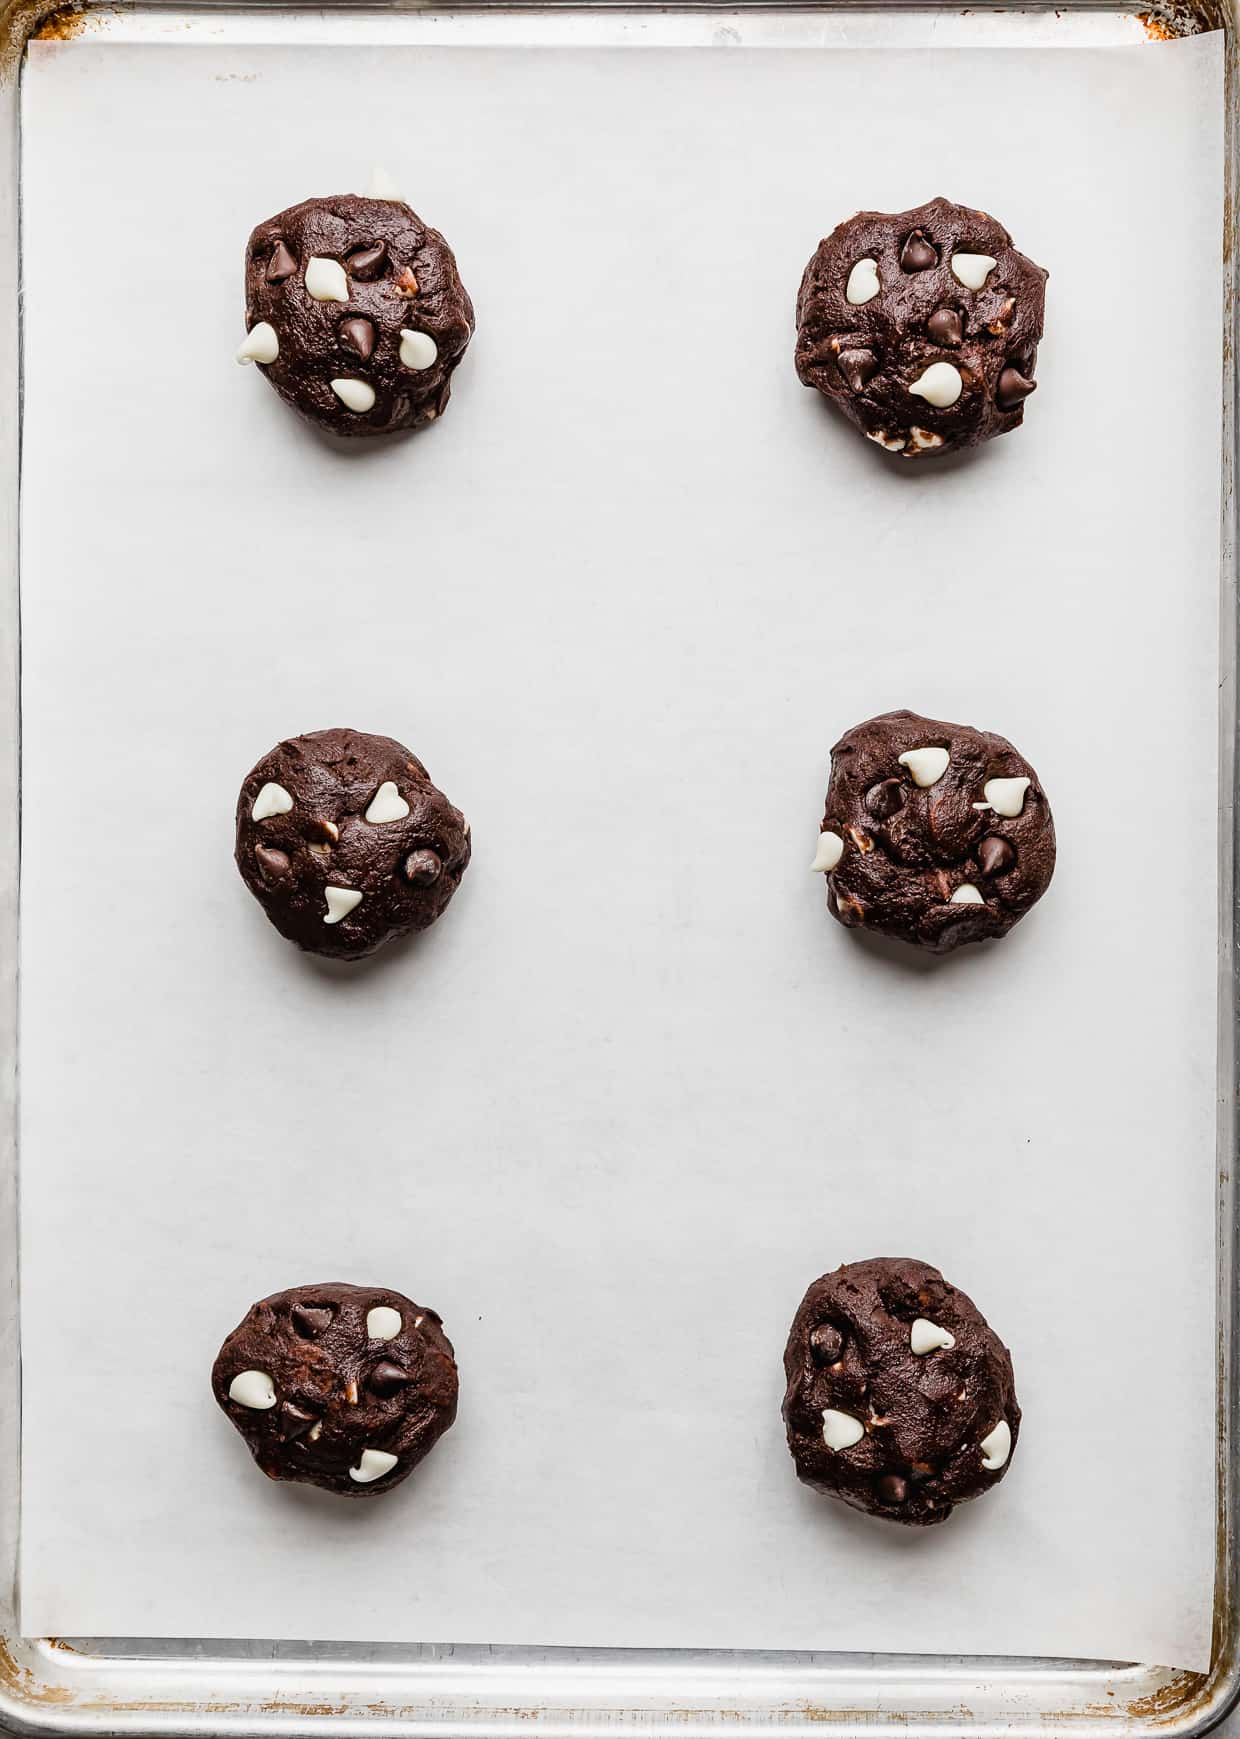 six Triple Chocolate Chip Cookie dough balls on a white parchment lined baking sheet.